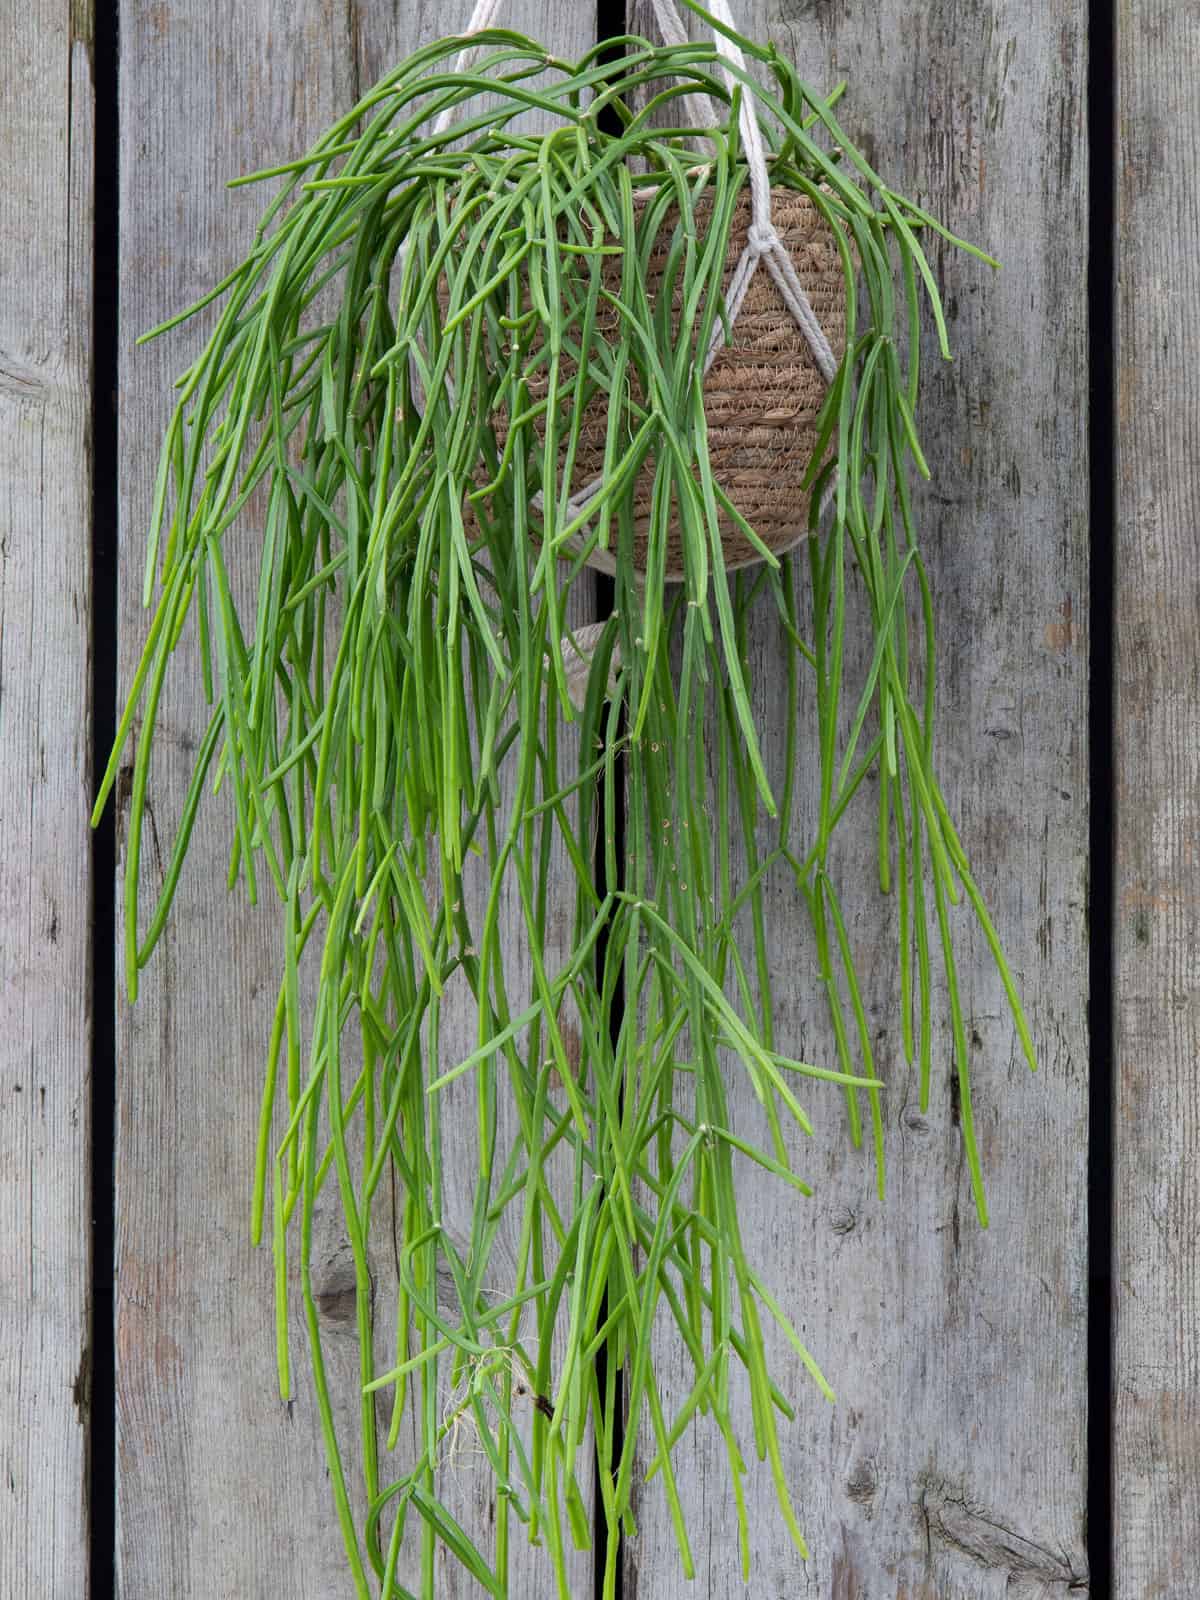 Hanging leaves of a Mistletoe Cactus placed on the side of a barn